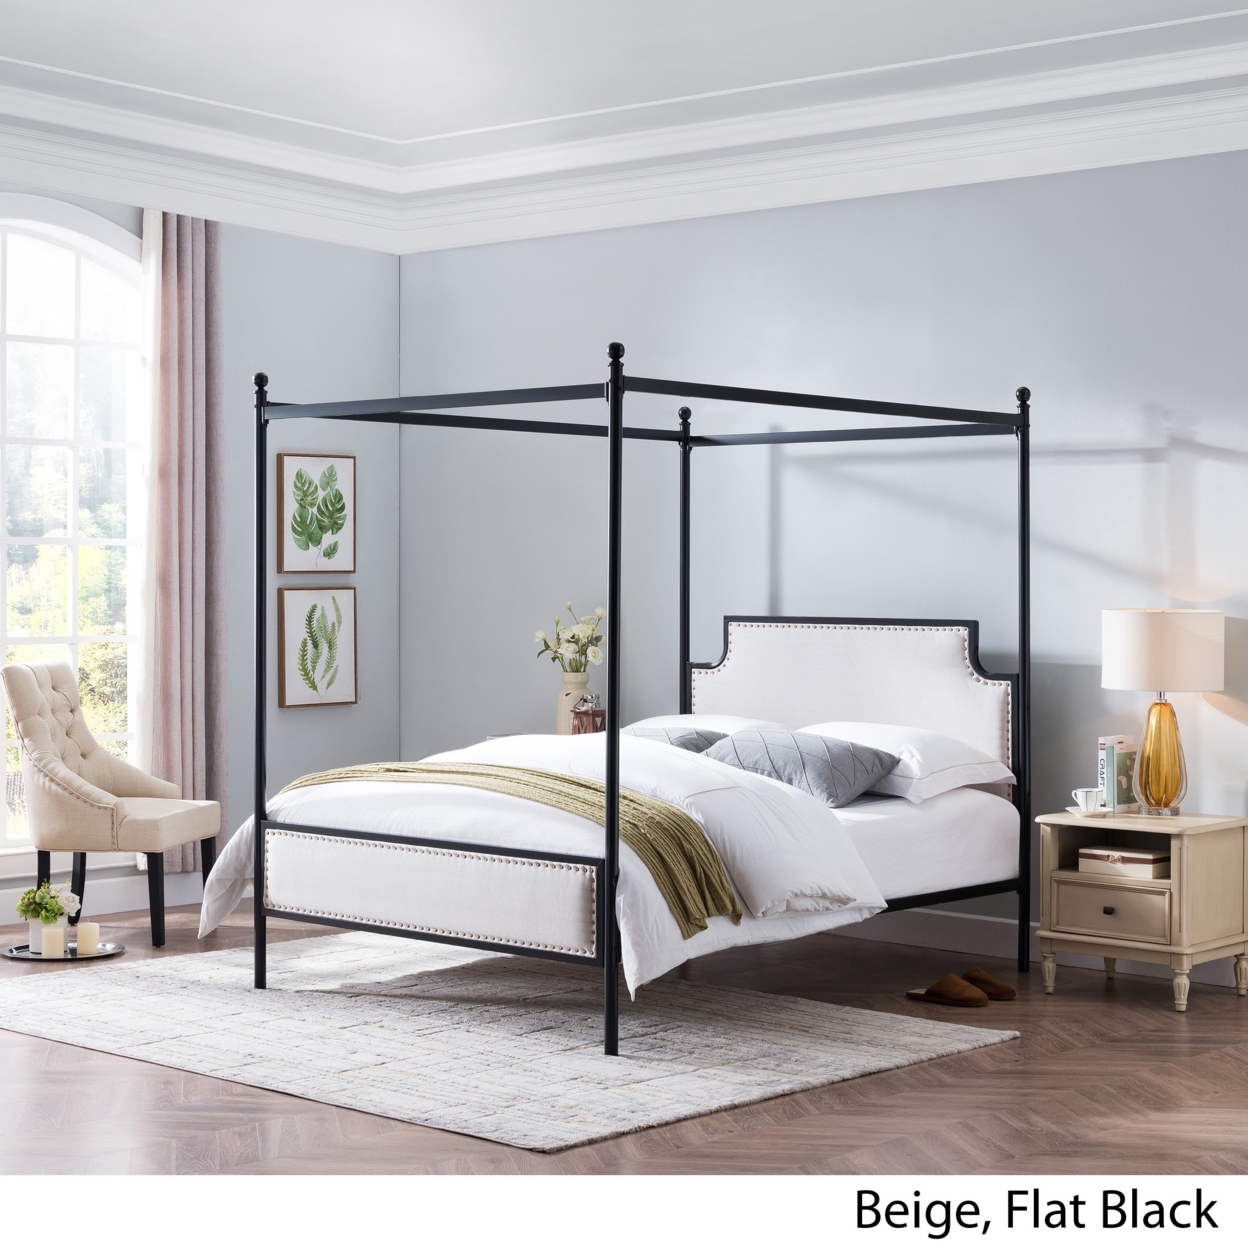 Asa Queen Size Iron Canopy Bed Frame With Upholstered Studded Headboard - Gray